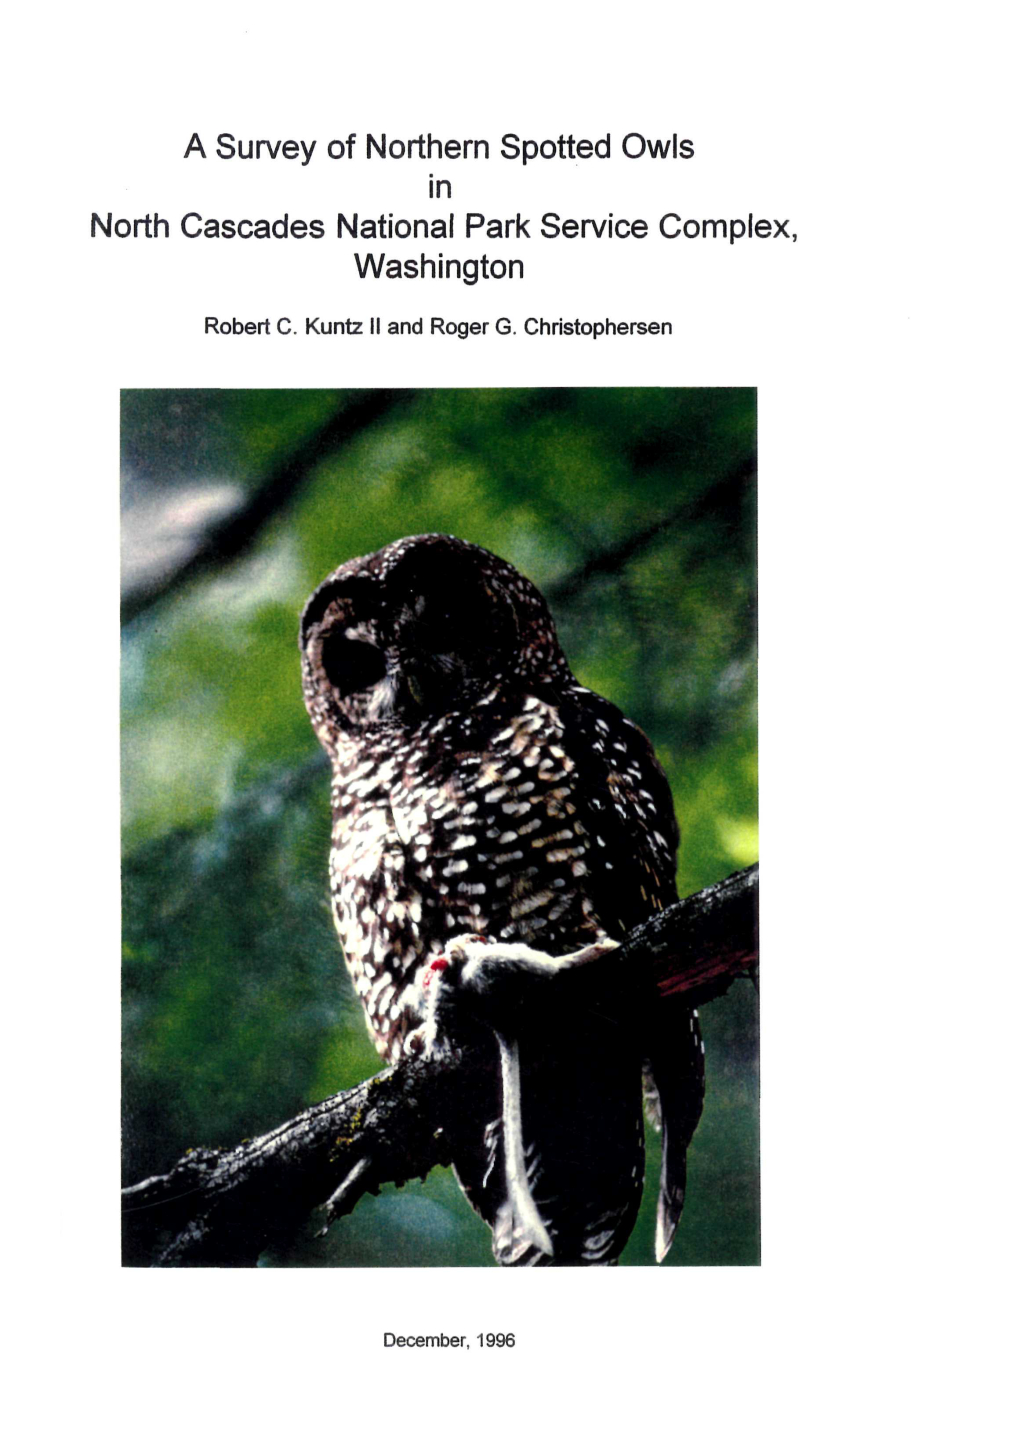 A Survey of Northern Spotted Owls in North Cascades National Park Service Complex, Washington